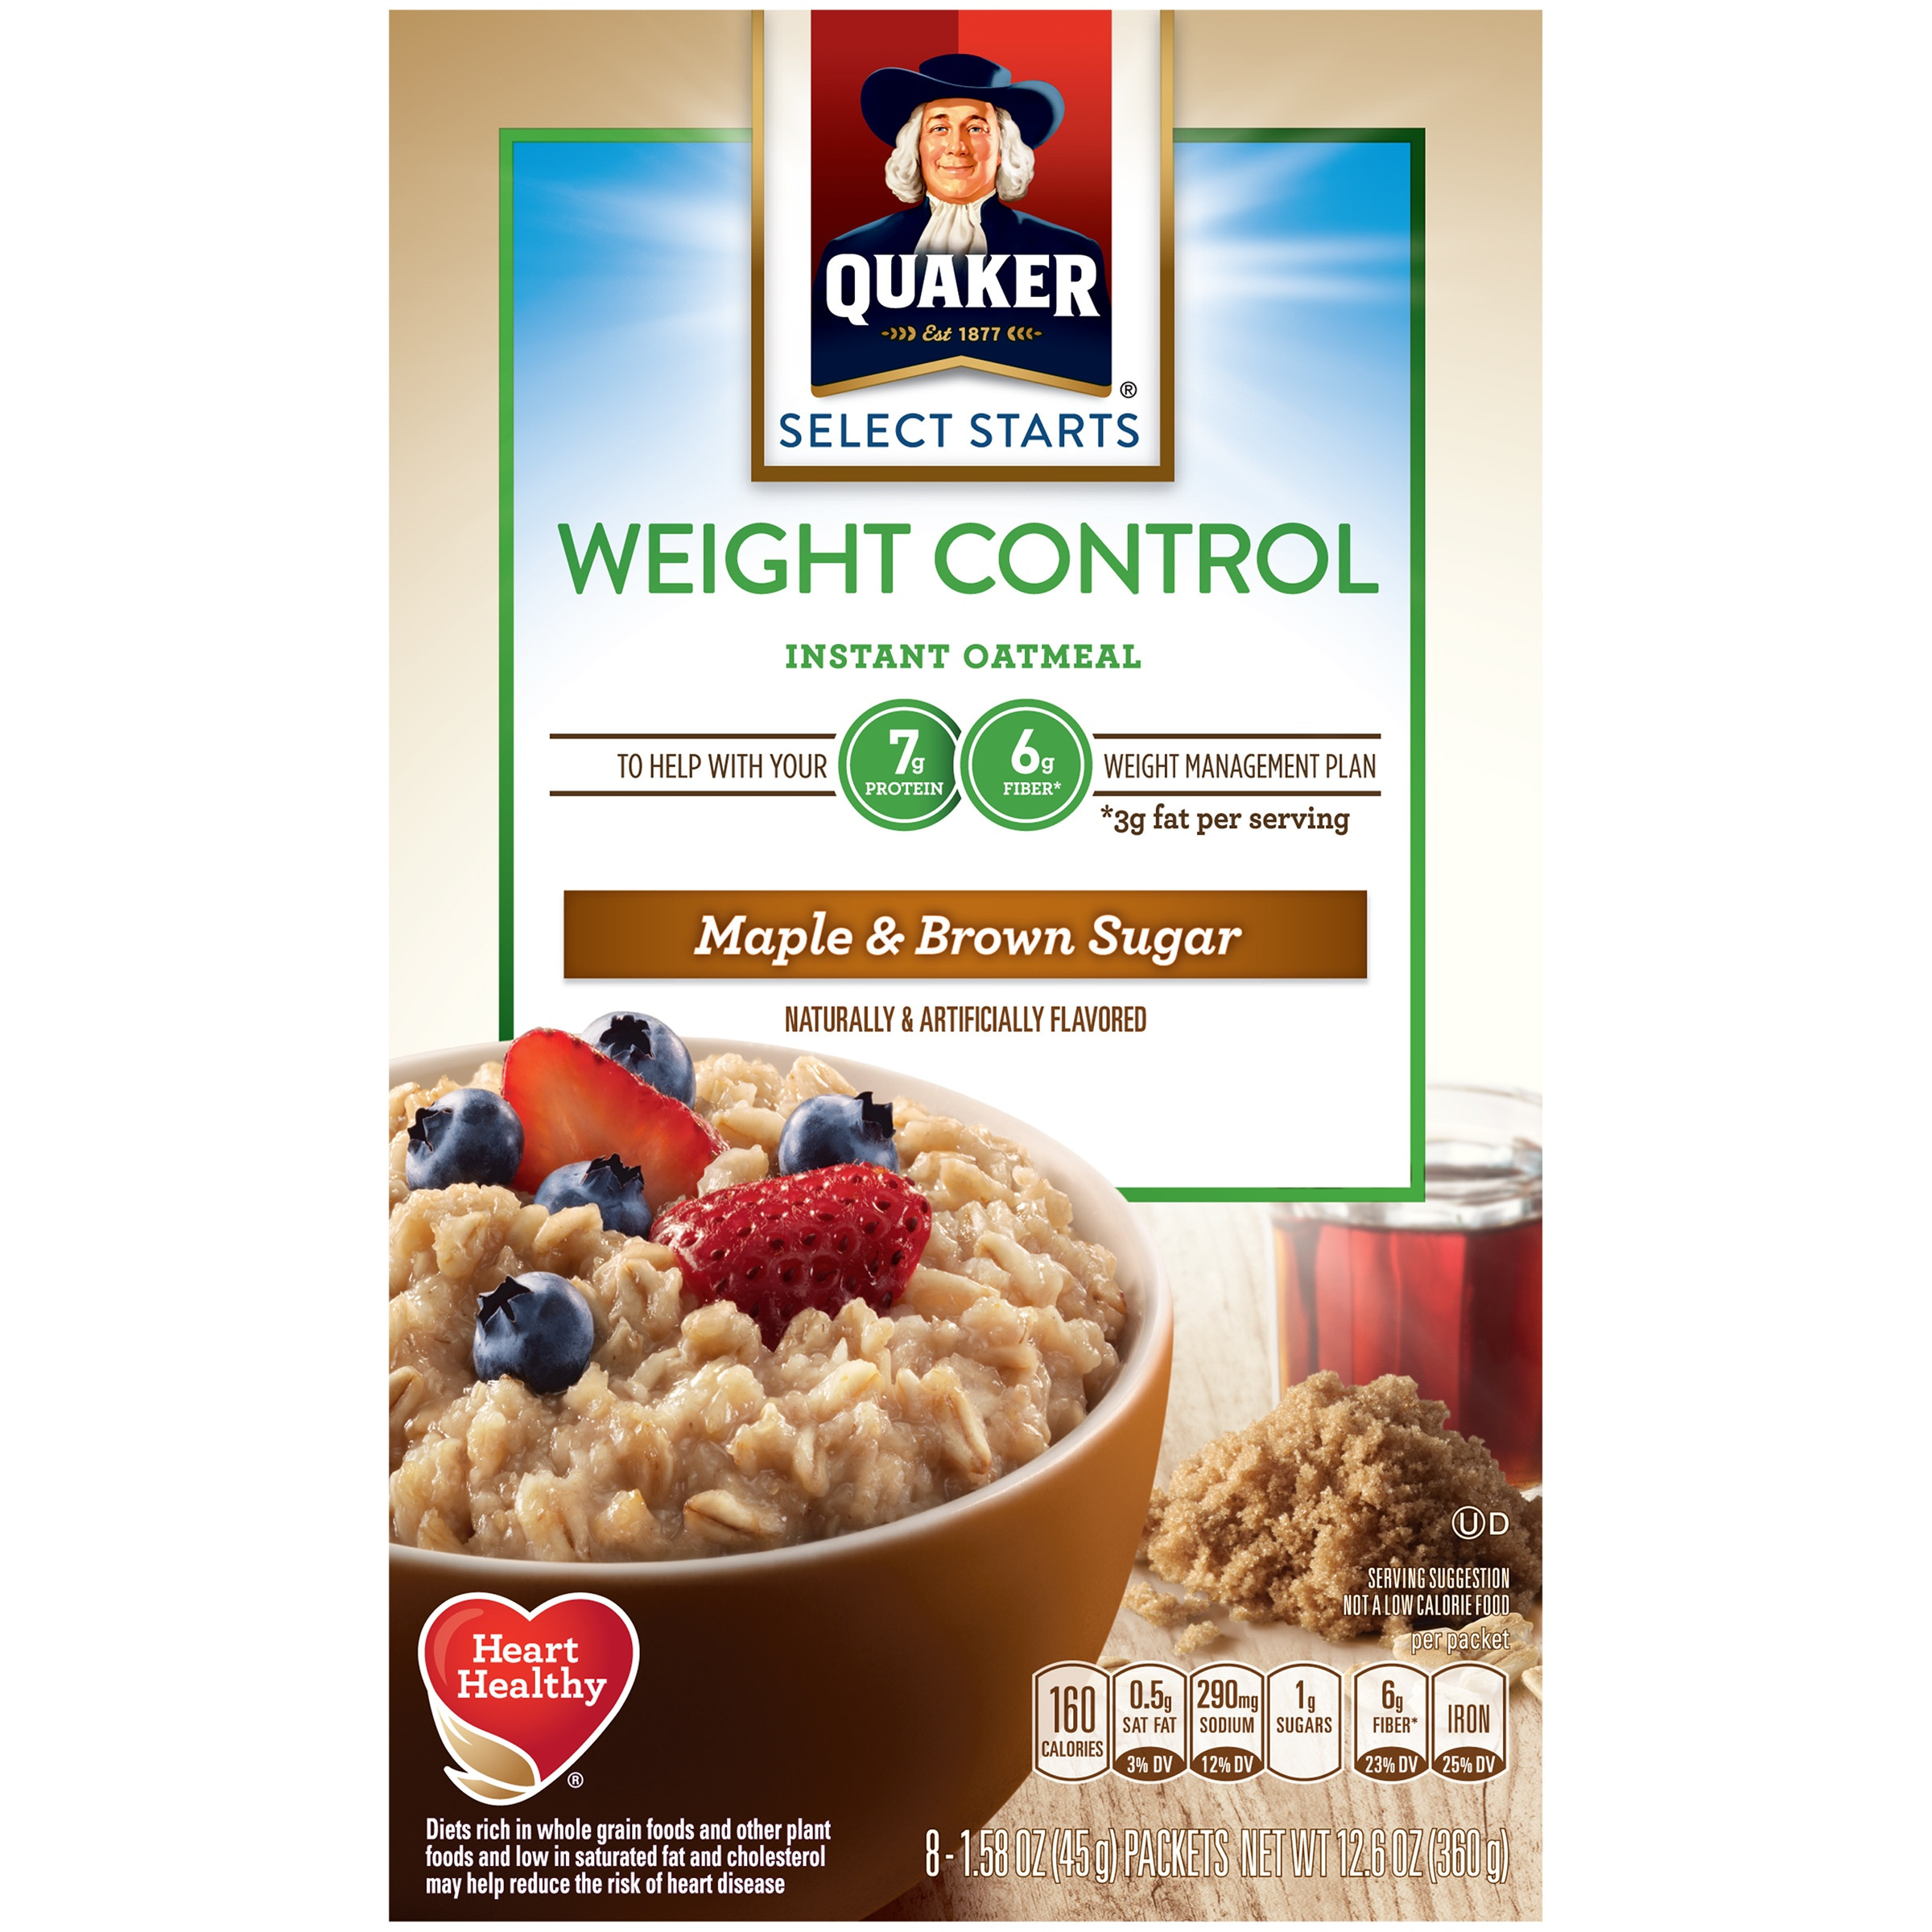 Quaker Oats Weight Control
 Quaker Select Starts Weight Control Instant Oatmeal Maple